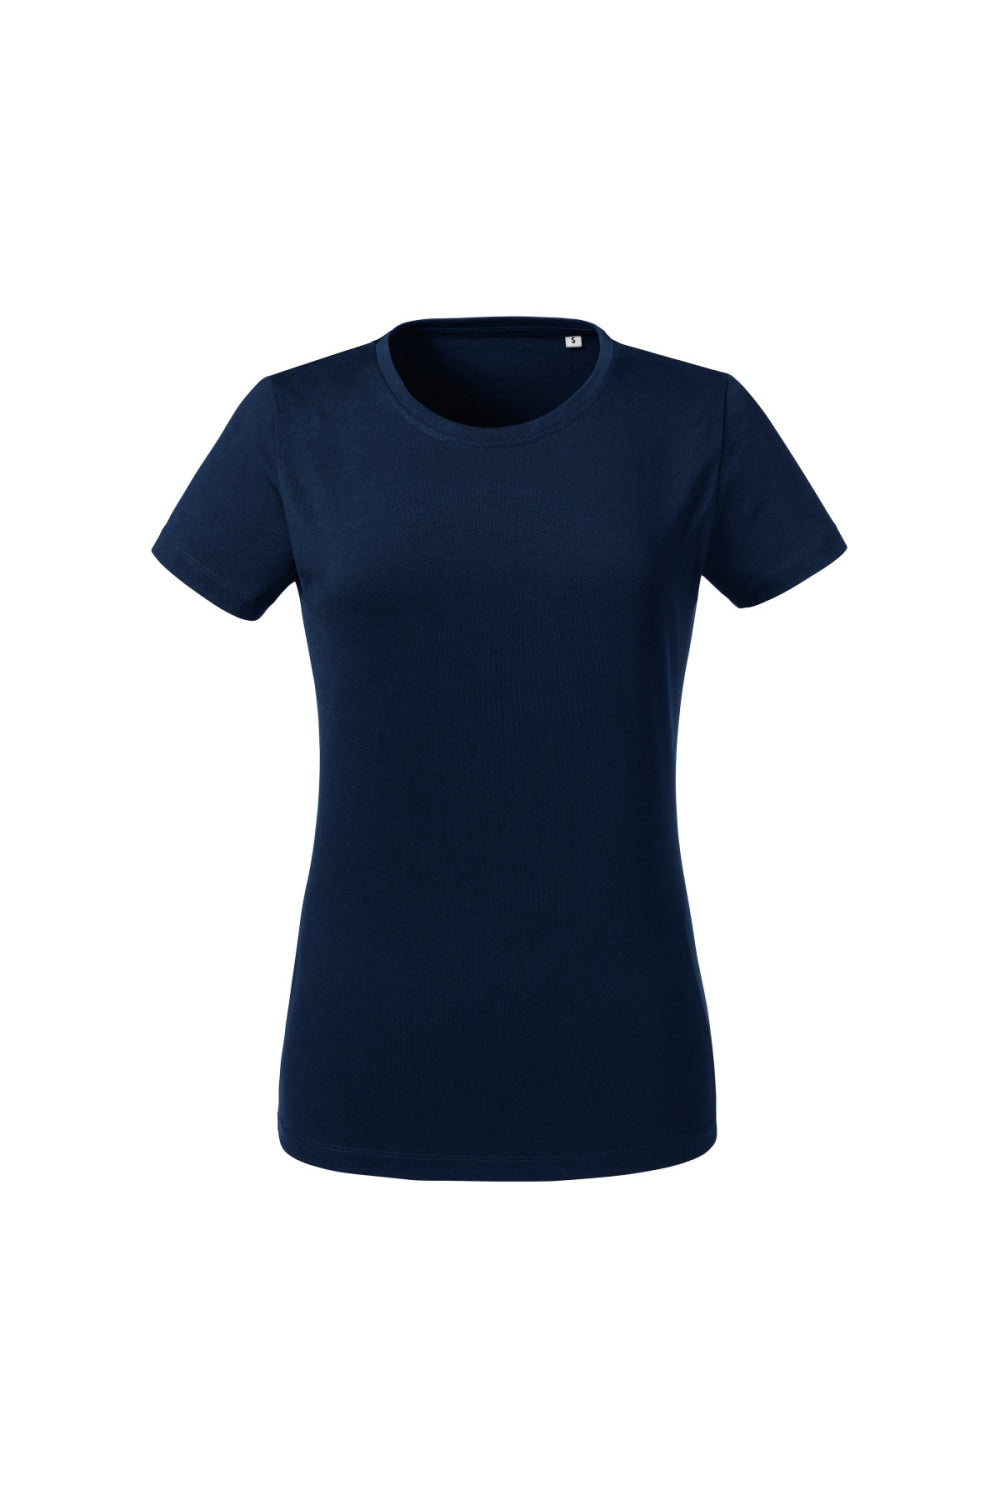 Russell Womens/Ladies Heavyweight Short-Sleeved T-Shirt (French Navy)